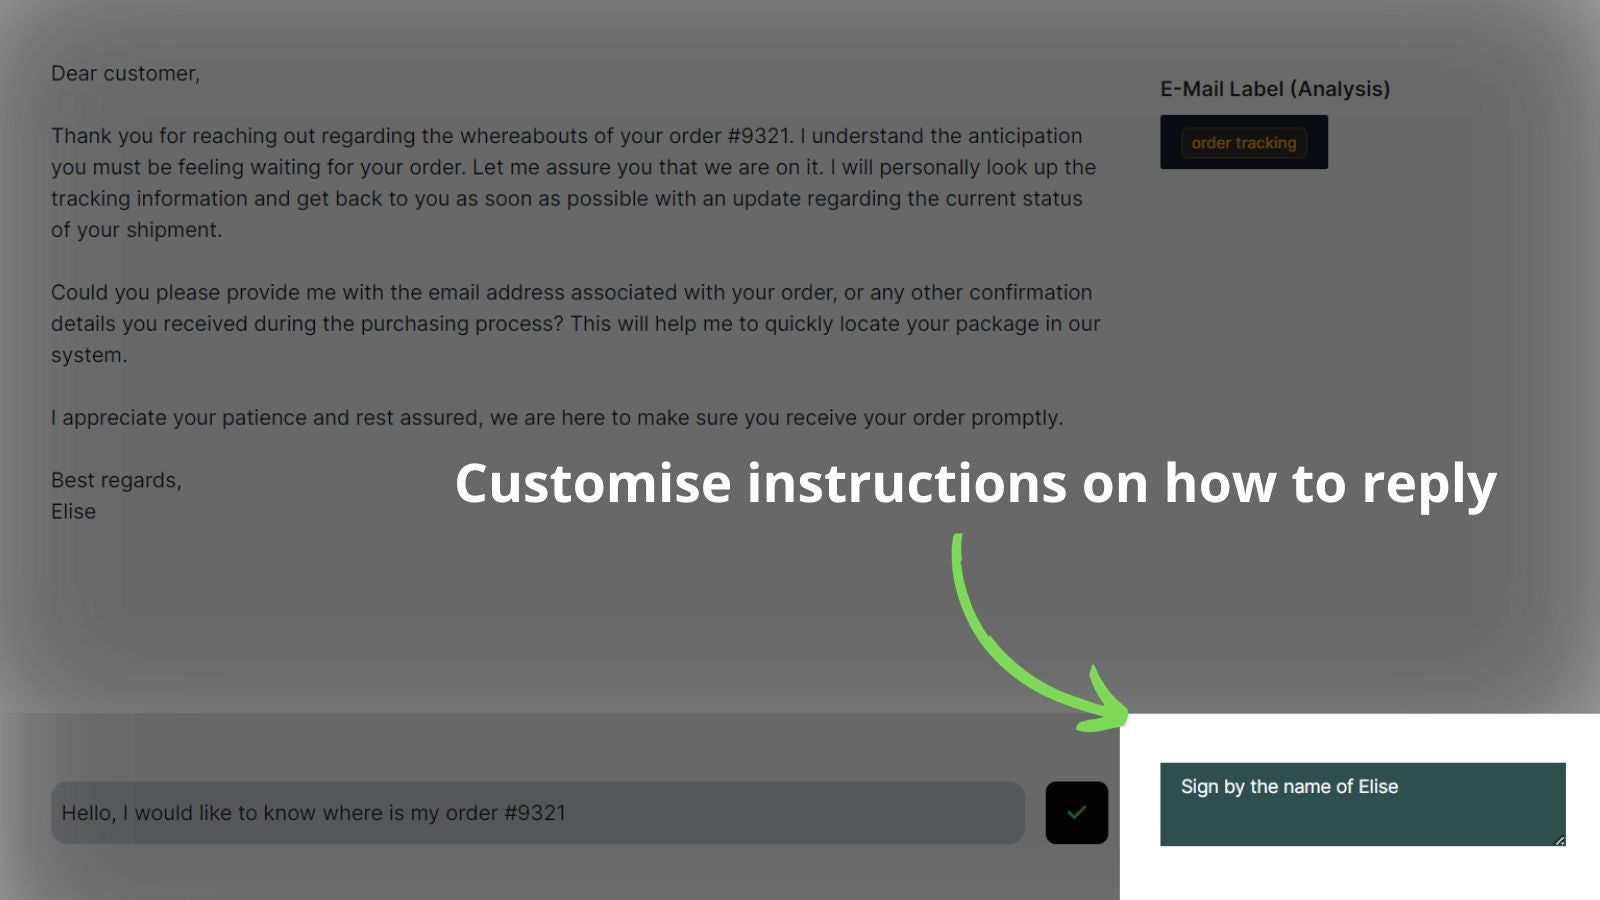 Customise instructions on how to reply